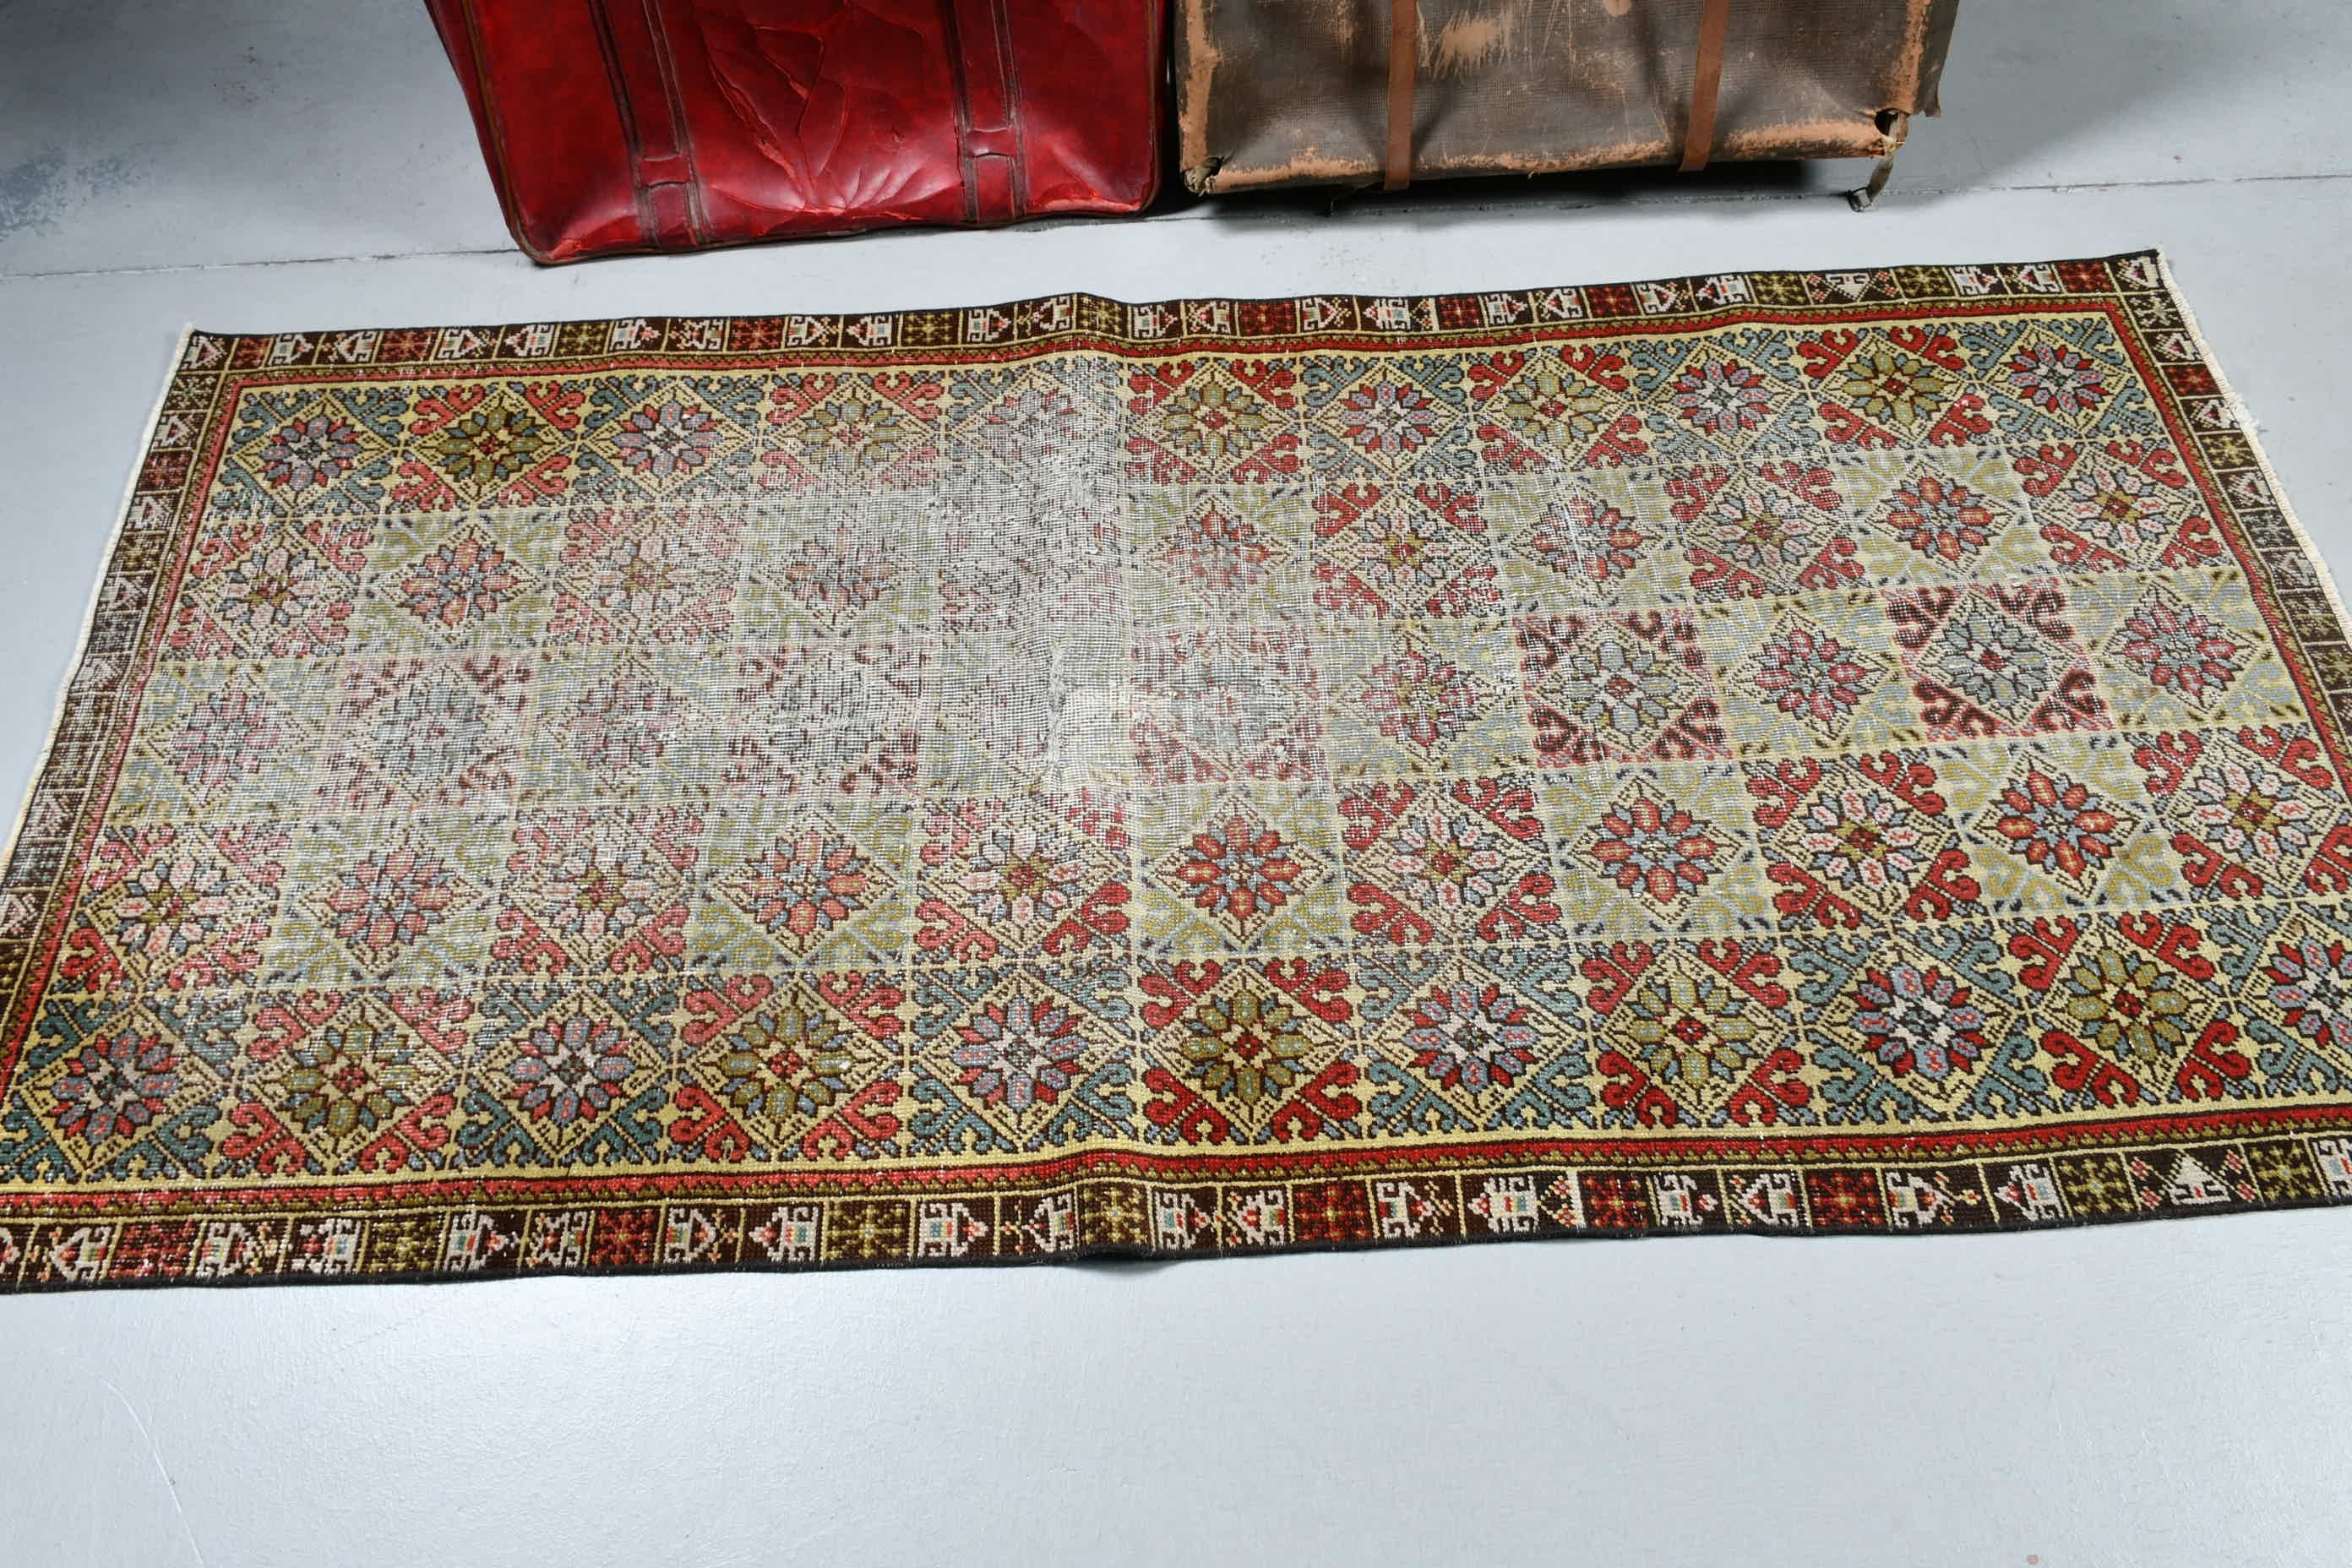 Kitchen Rug, Vintage Rug, Entry Rug, Home Decor Rugs, Turkish Rug, Antique Rugs, 3x6.2 ft Accent Rugs, Green Moroccan Rug, Tribal Rug